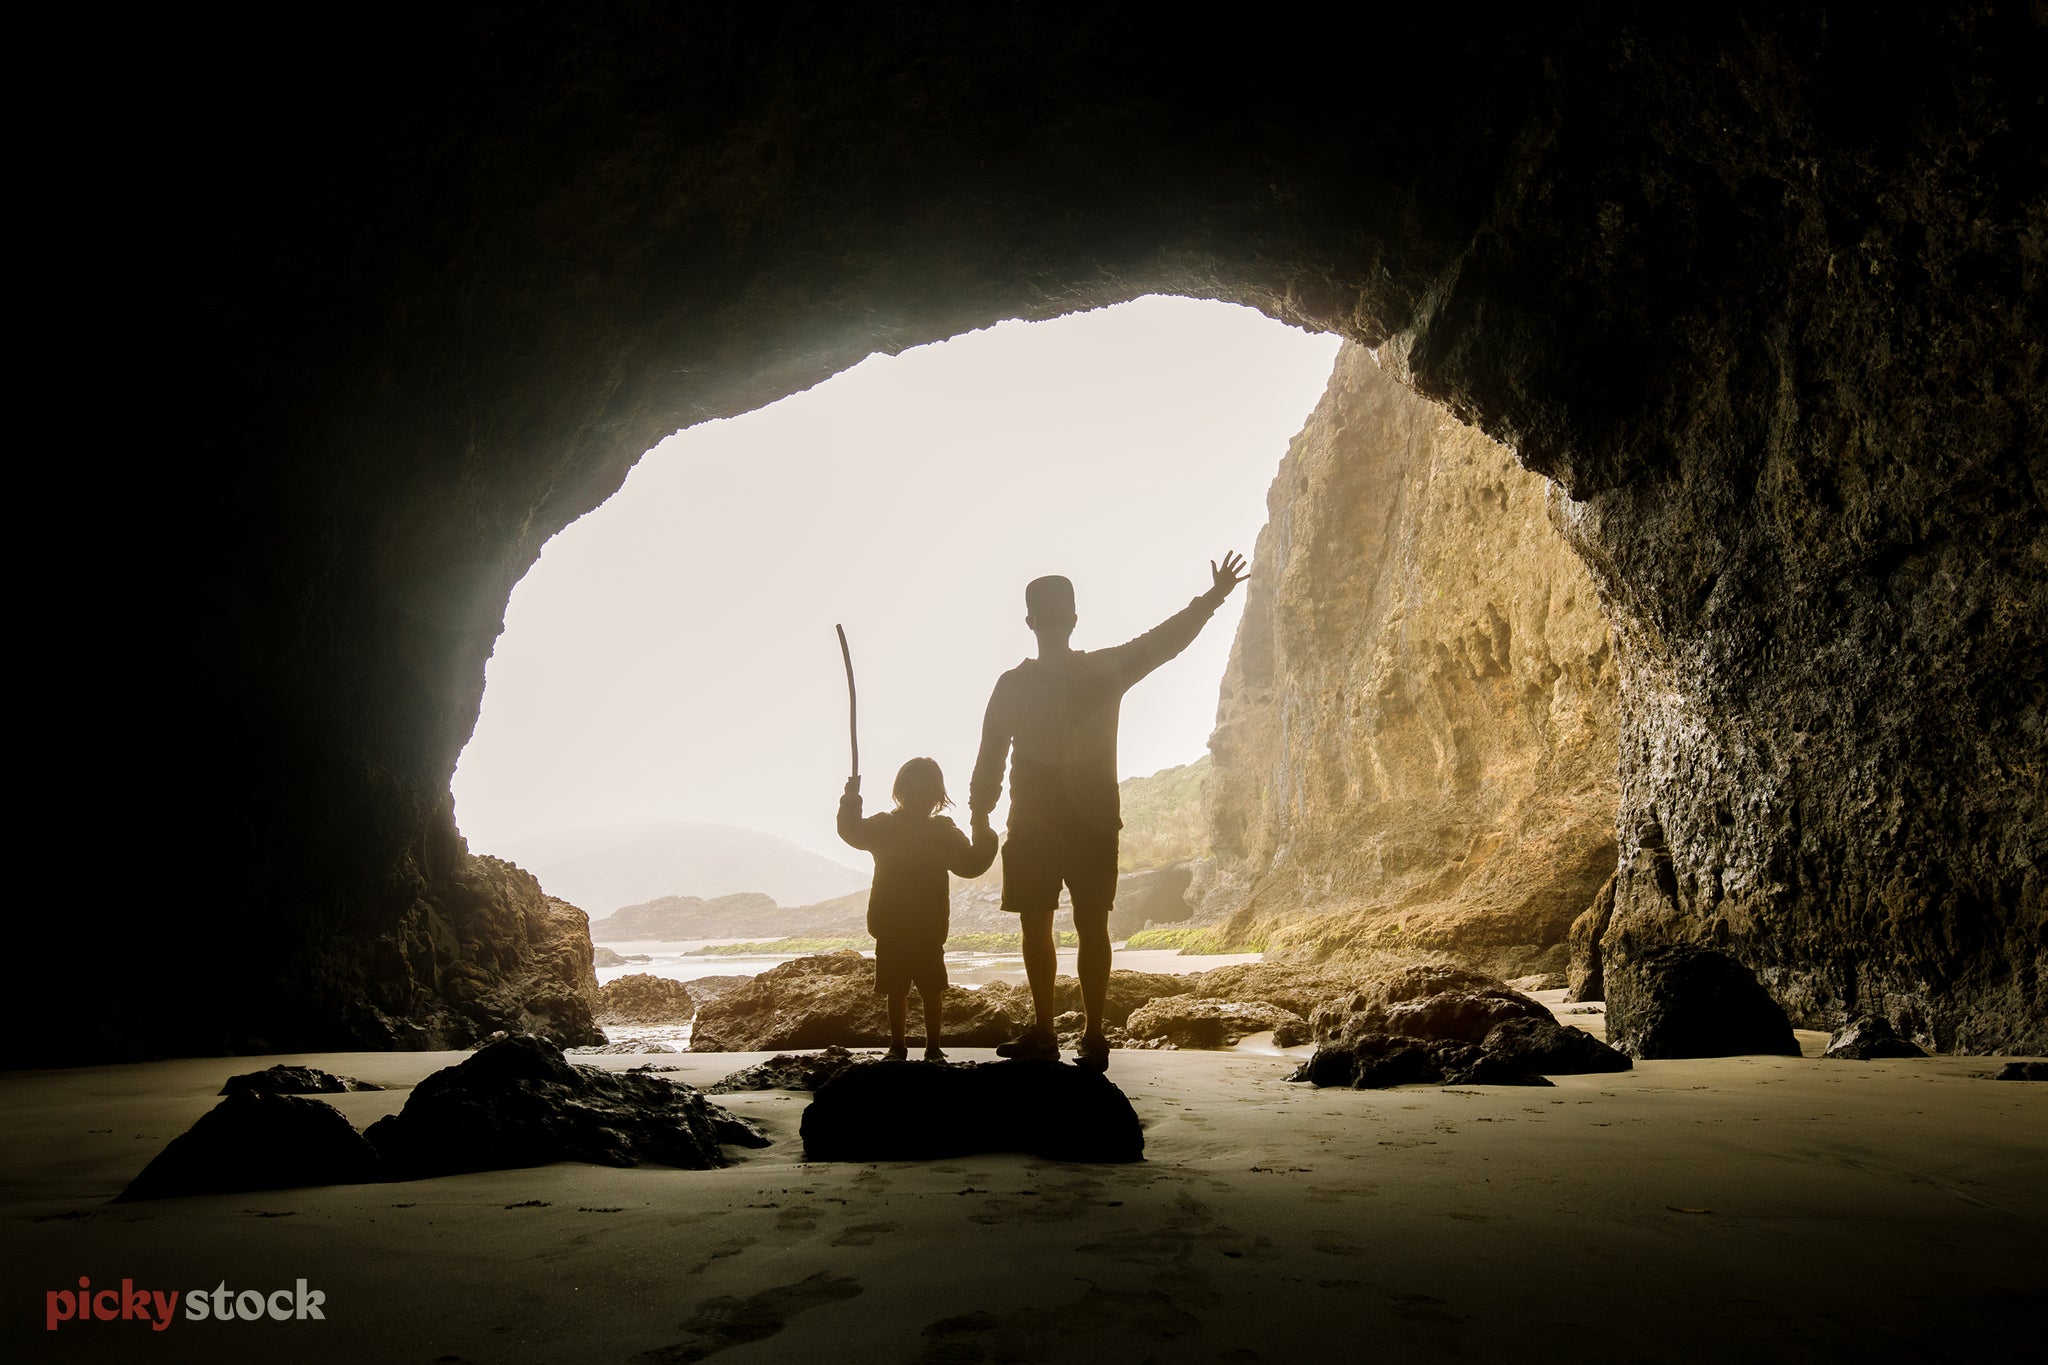 Landscape of an adult and child silhouetted in a beachside cave. The child waves a stick high above their head atop a rock.